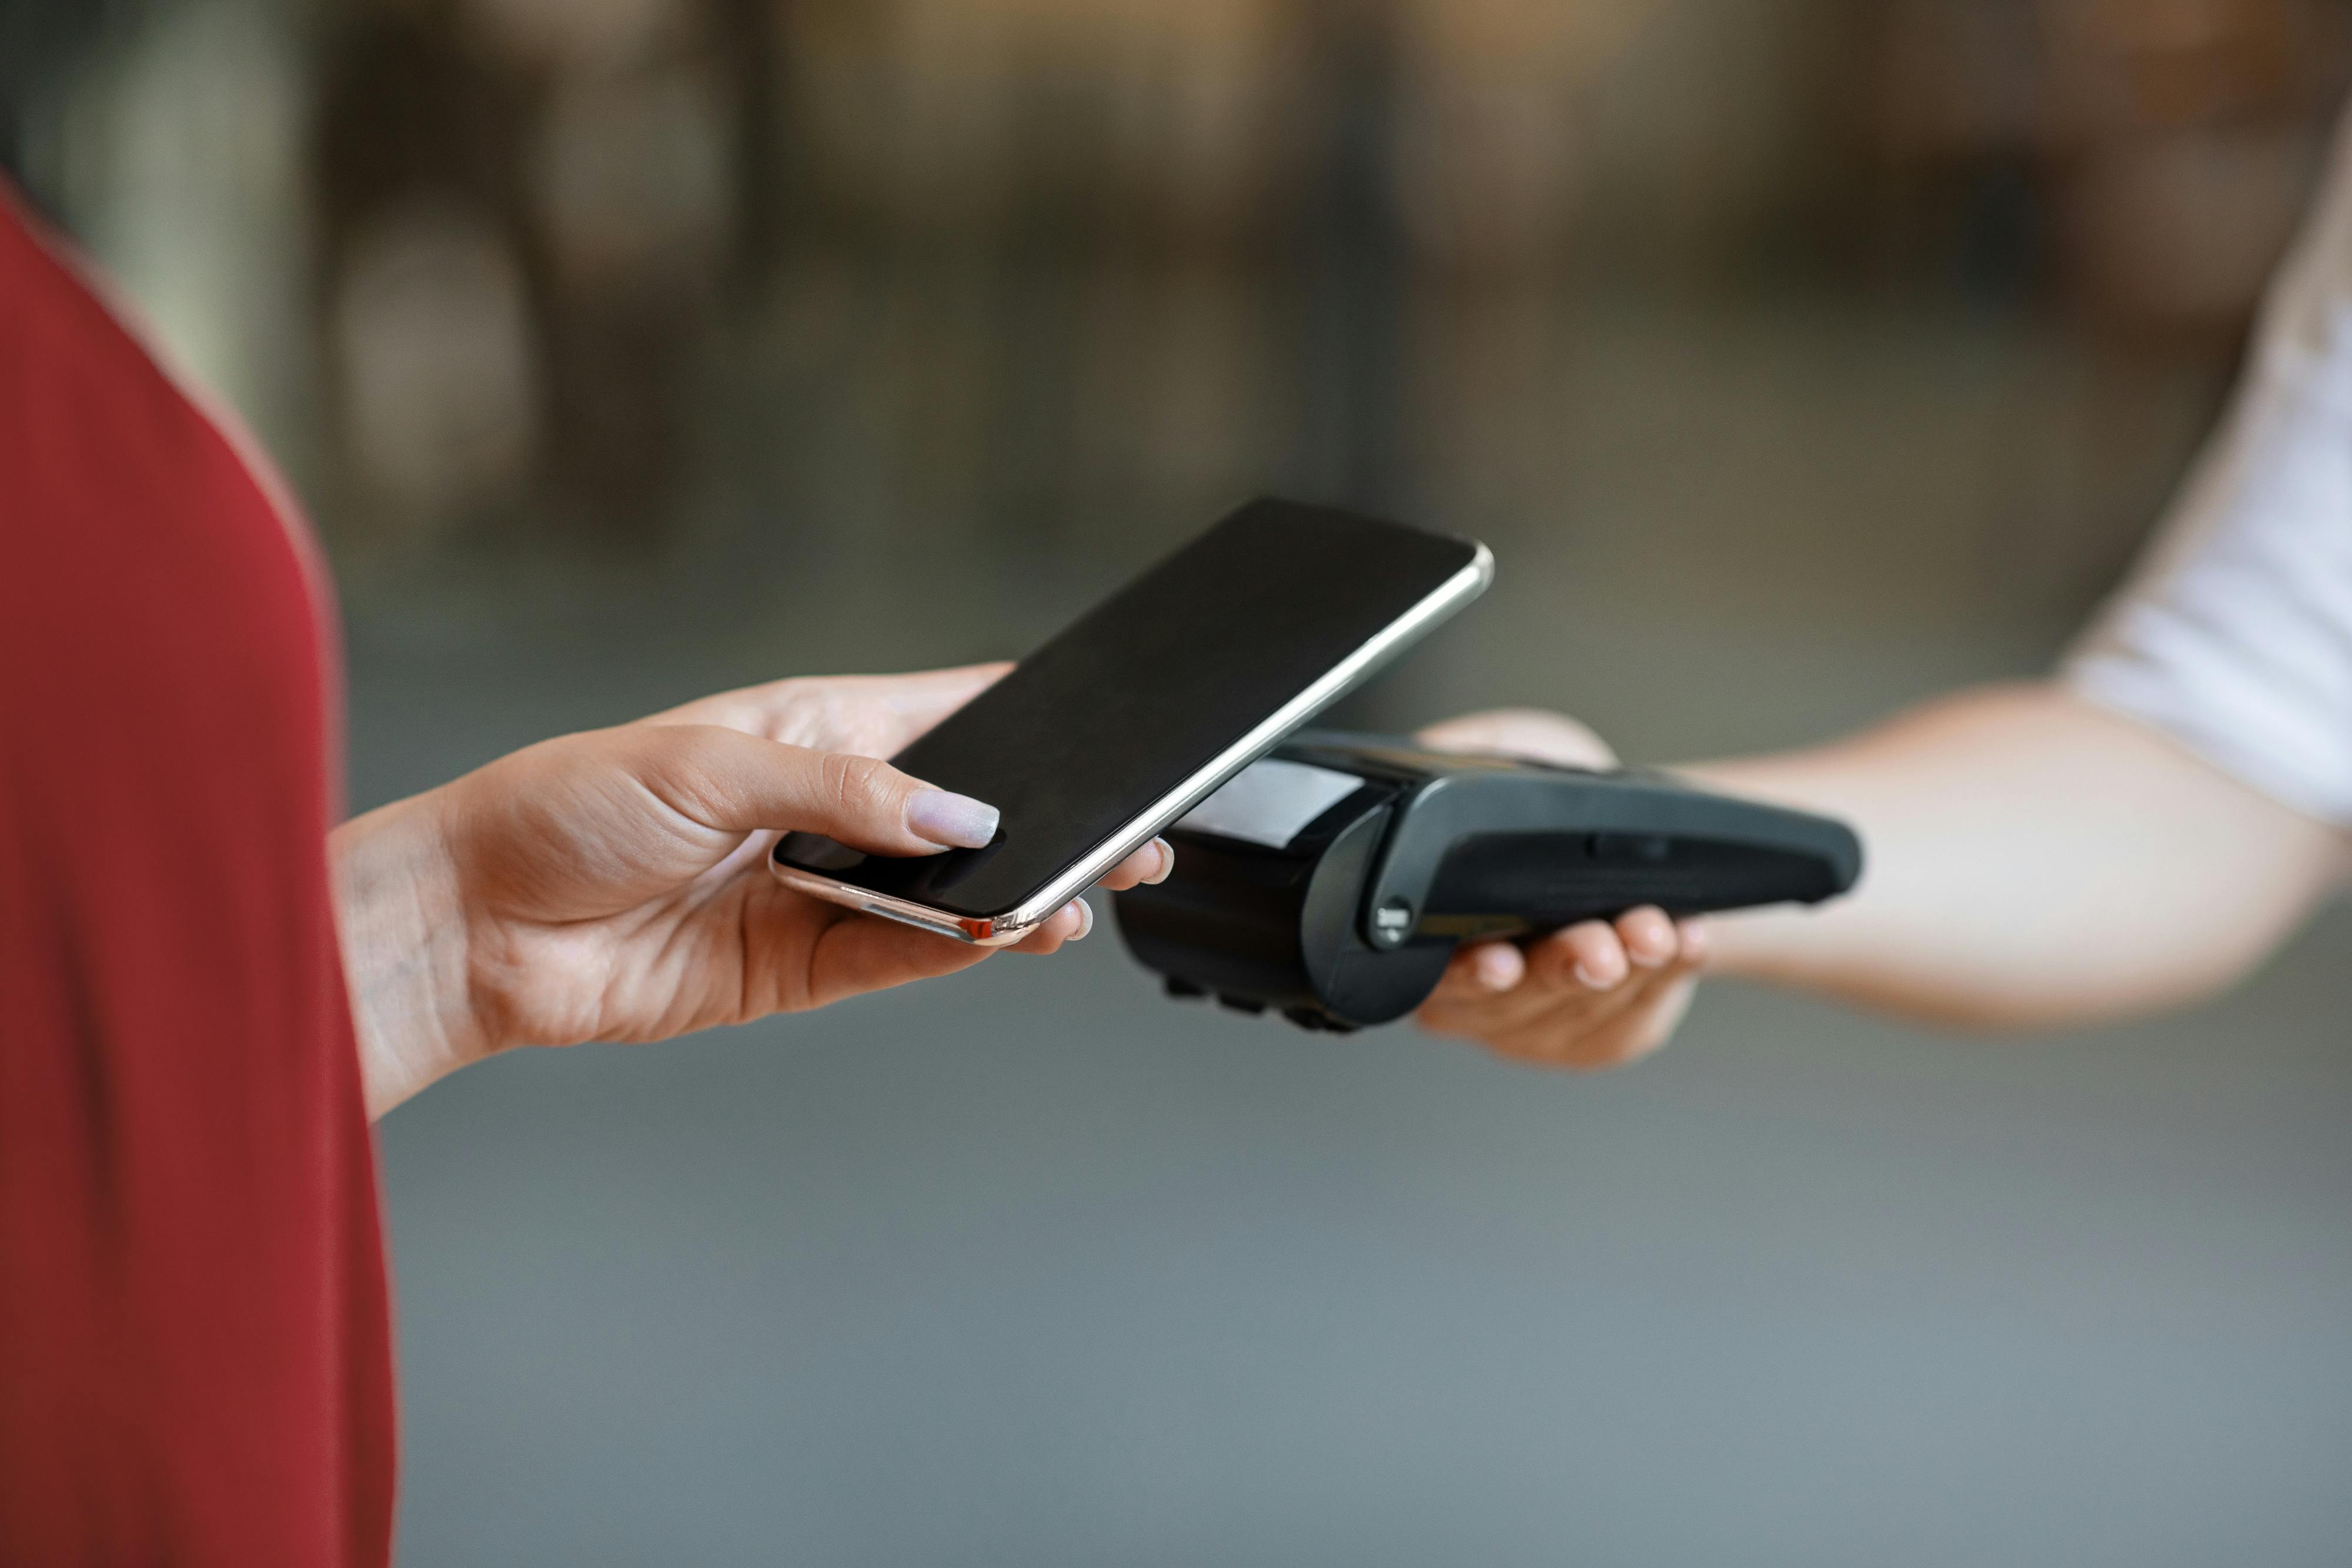 NFC Technology. Unrecognizable woman maiking contactless payment with smartphone to terminal